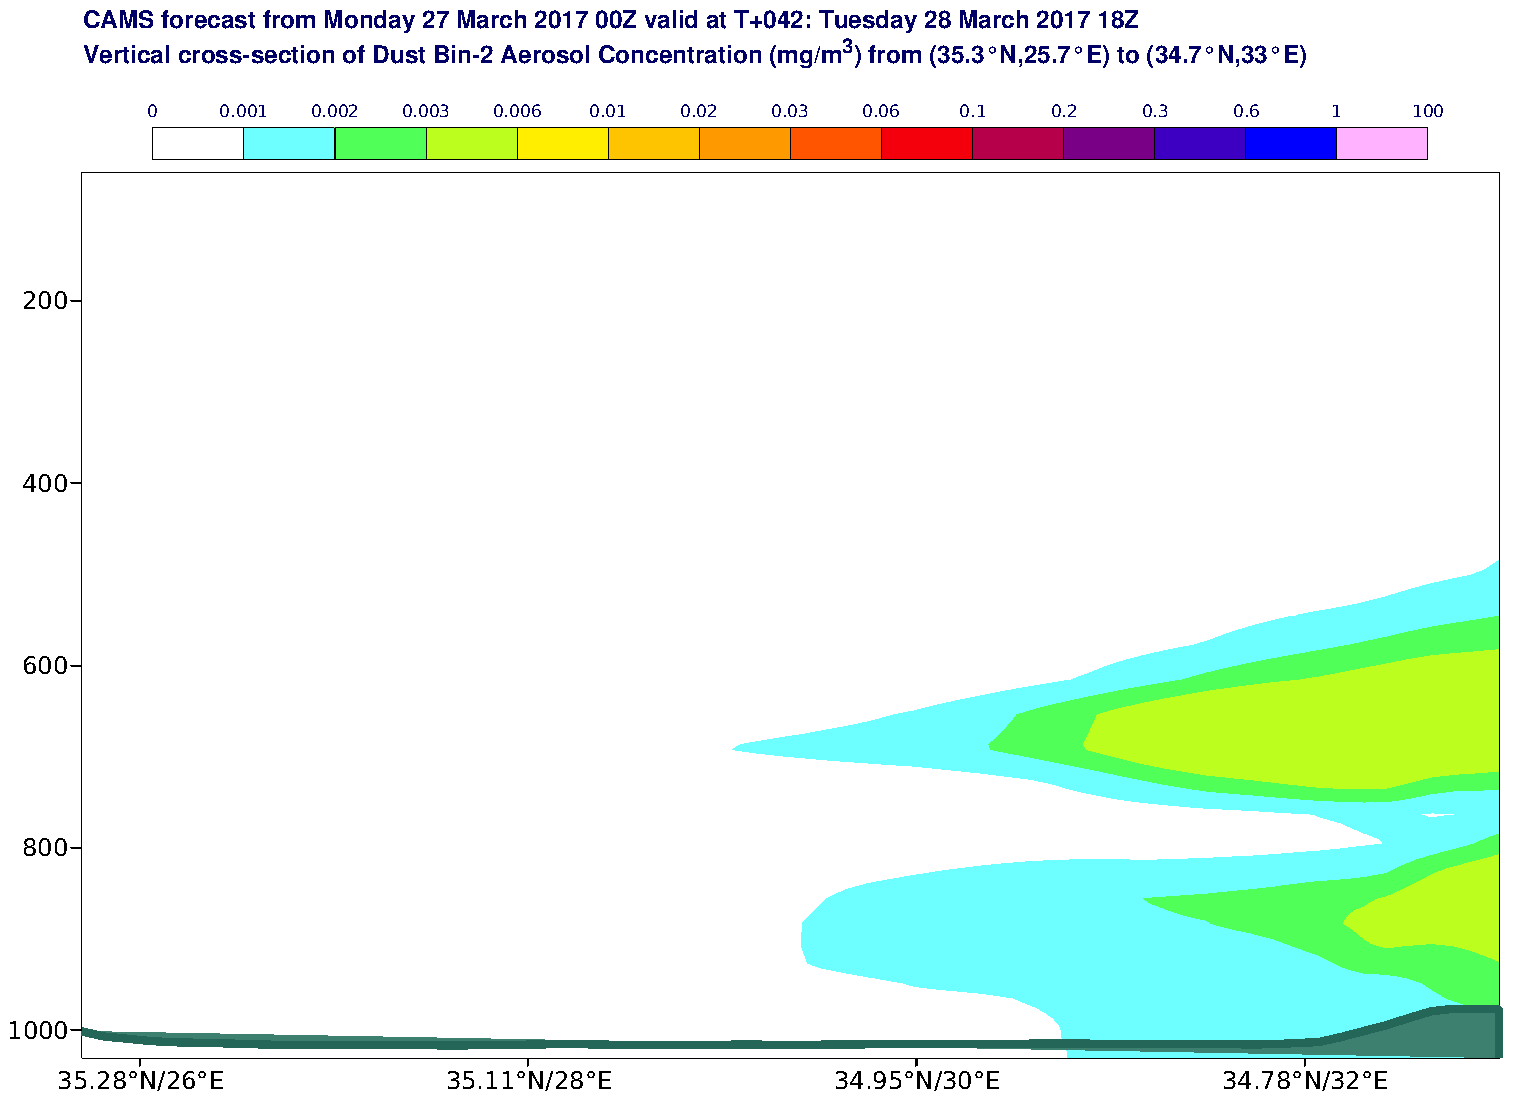 Vertical cross-section of Dust Bin-2 Aerosol Concentration (mg/m3) valid at T42 - 2017-03-28 18:00